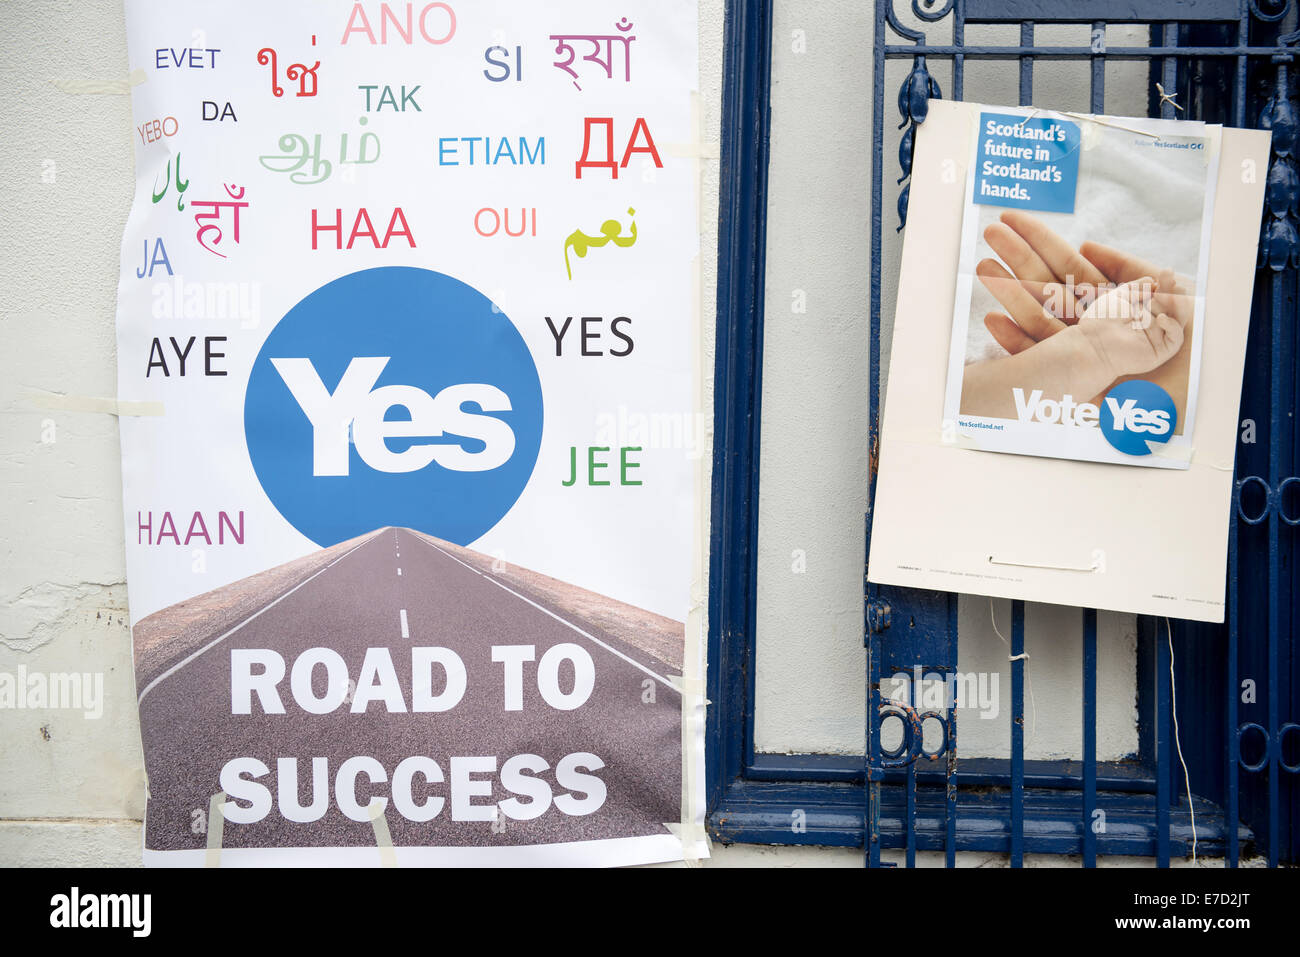 Glasgow, Scotland. 14th September, 2014. Pro-Scottish independence 'Yes Scotland' campaign posters, banners and Saltire flags adorn buildings in the Pollokshields area of the city, on September 14, 2014 in Glasgow, Scotland. Scotland will vote on whether or not to Leave the United Kingdom in a referendum to be held on September 18th this year. Credit:  Sam Kovak/Alamy Live News Stock Photo